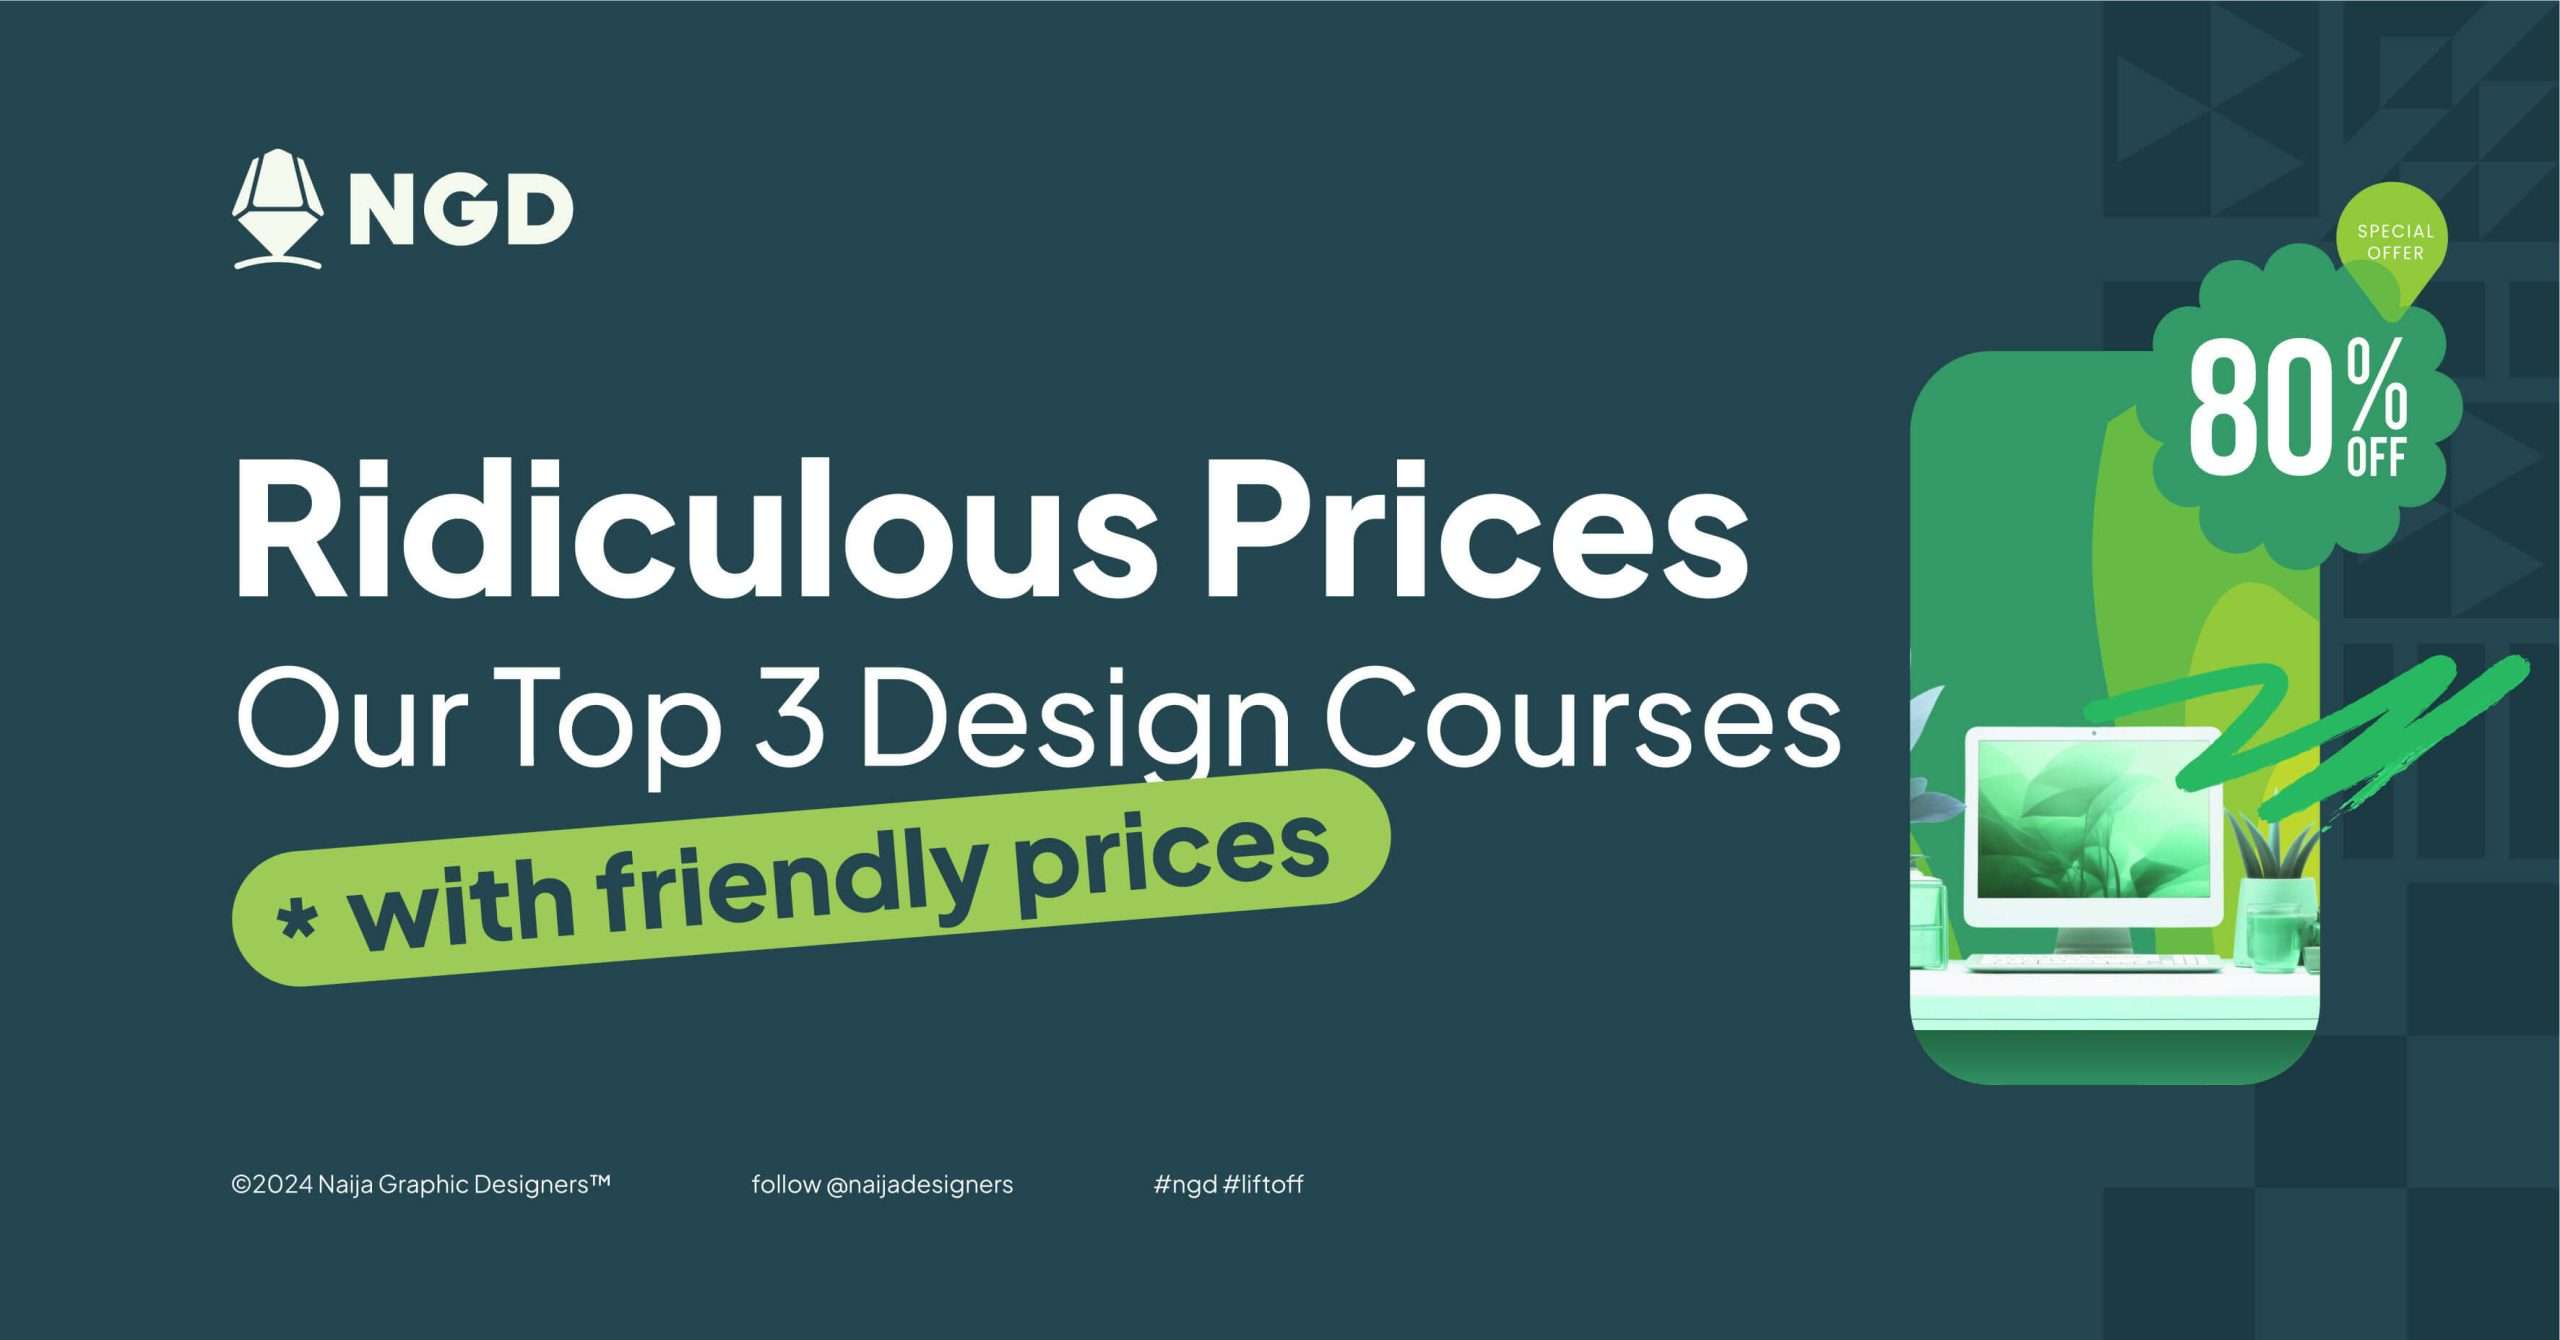 Top 3 Design Courses with Ridiculously Friendly Prices